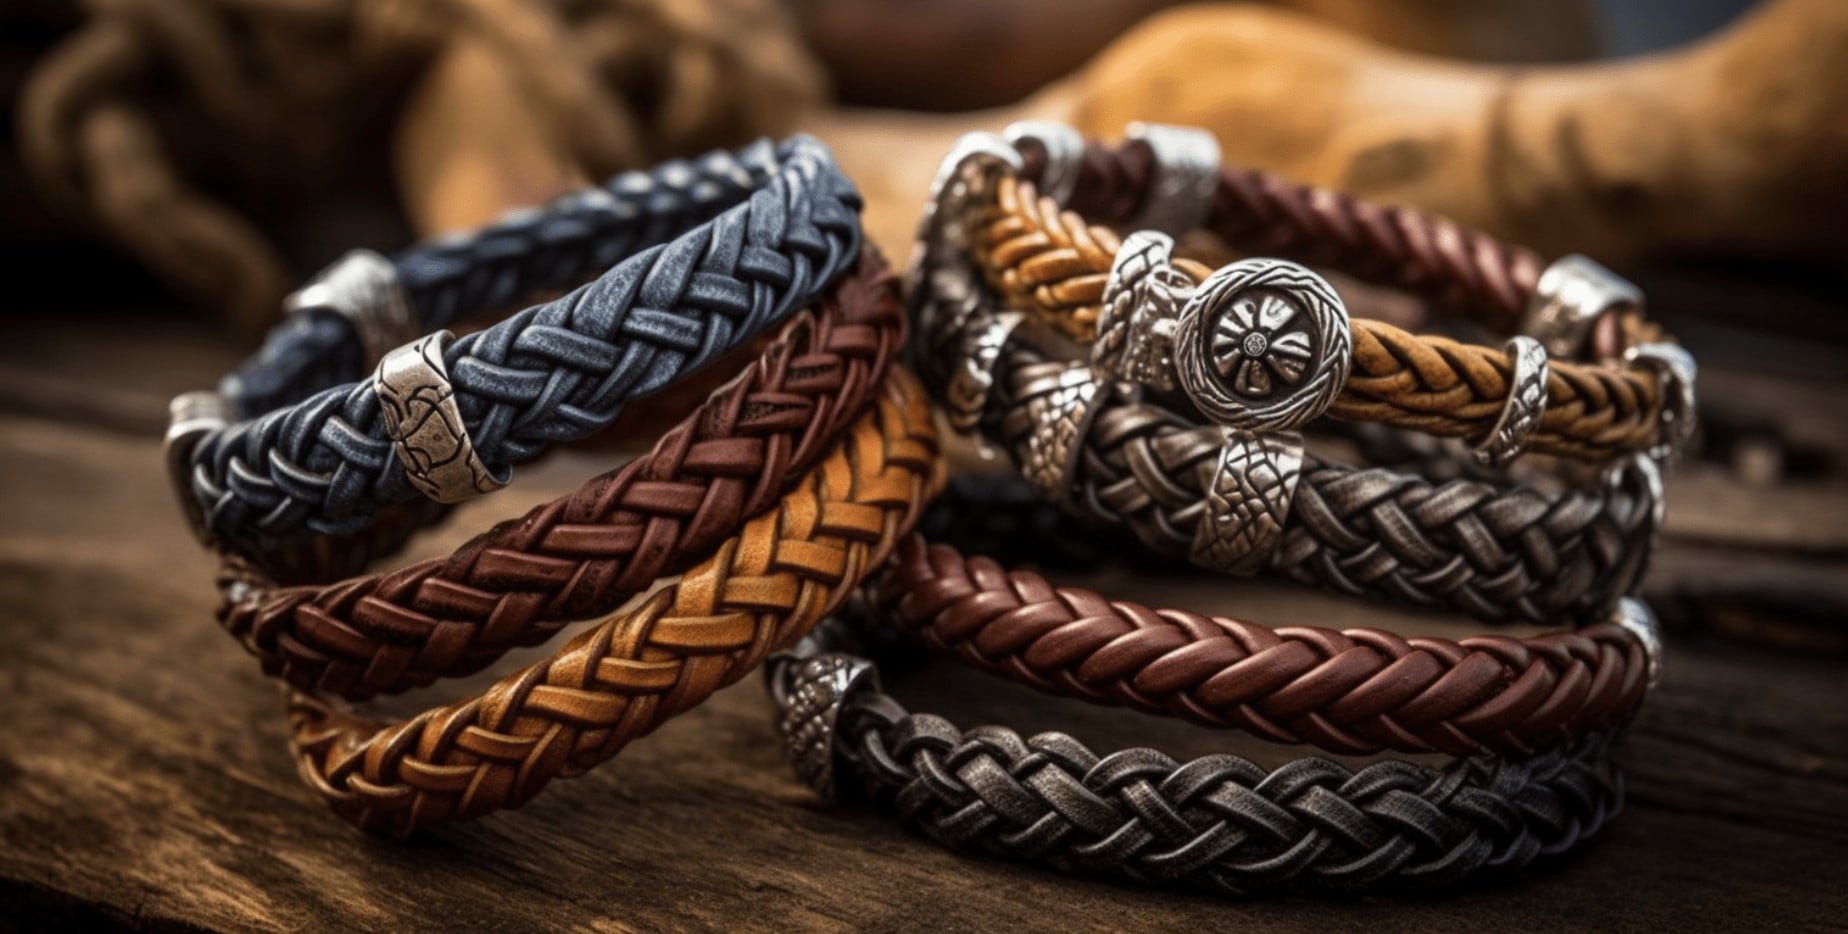 Braided Leather Bracelet - Style and Size Options to Make